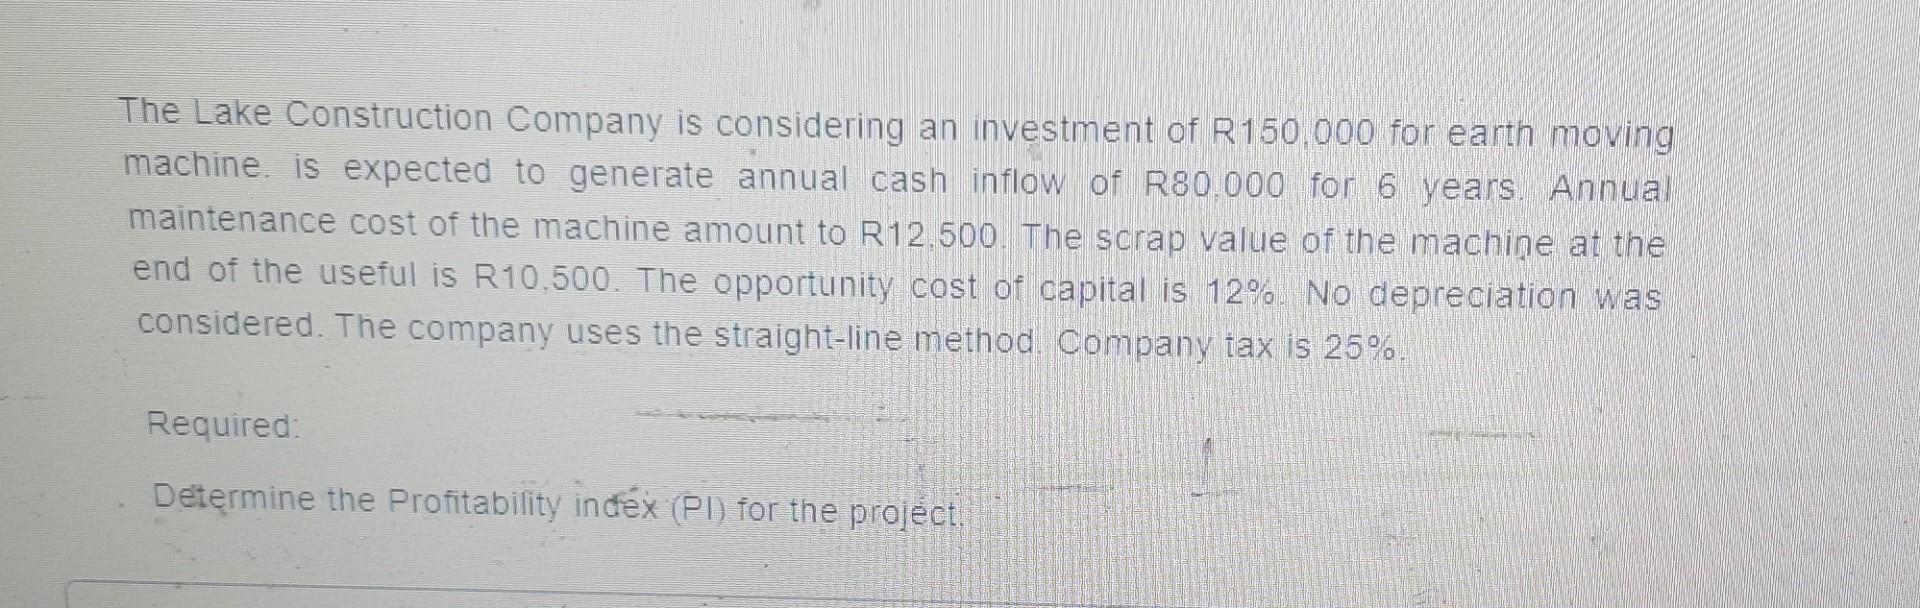 The Lake Construction Company is considering an investment of R150,000 for earth moving machine. is expected